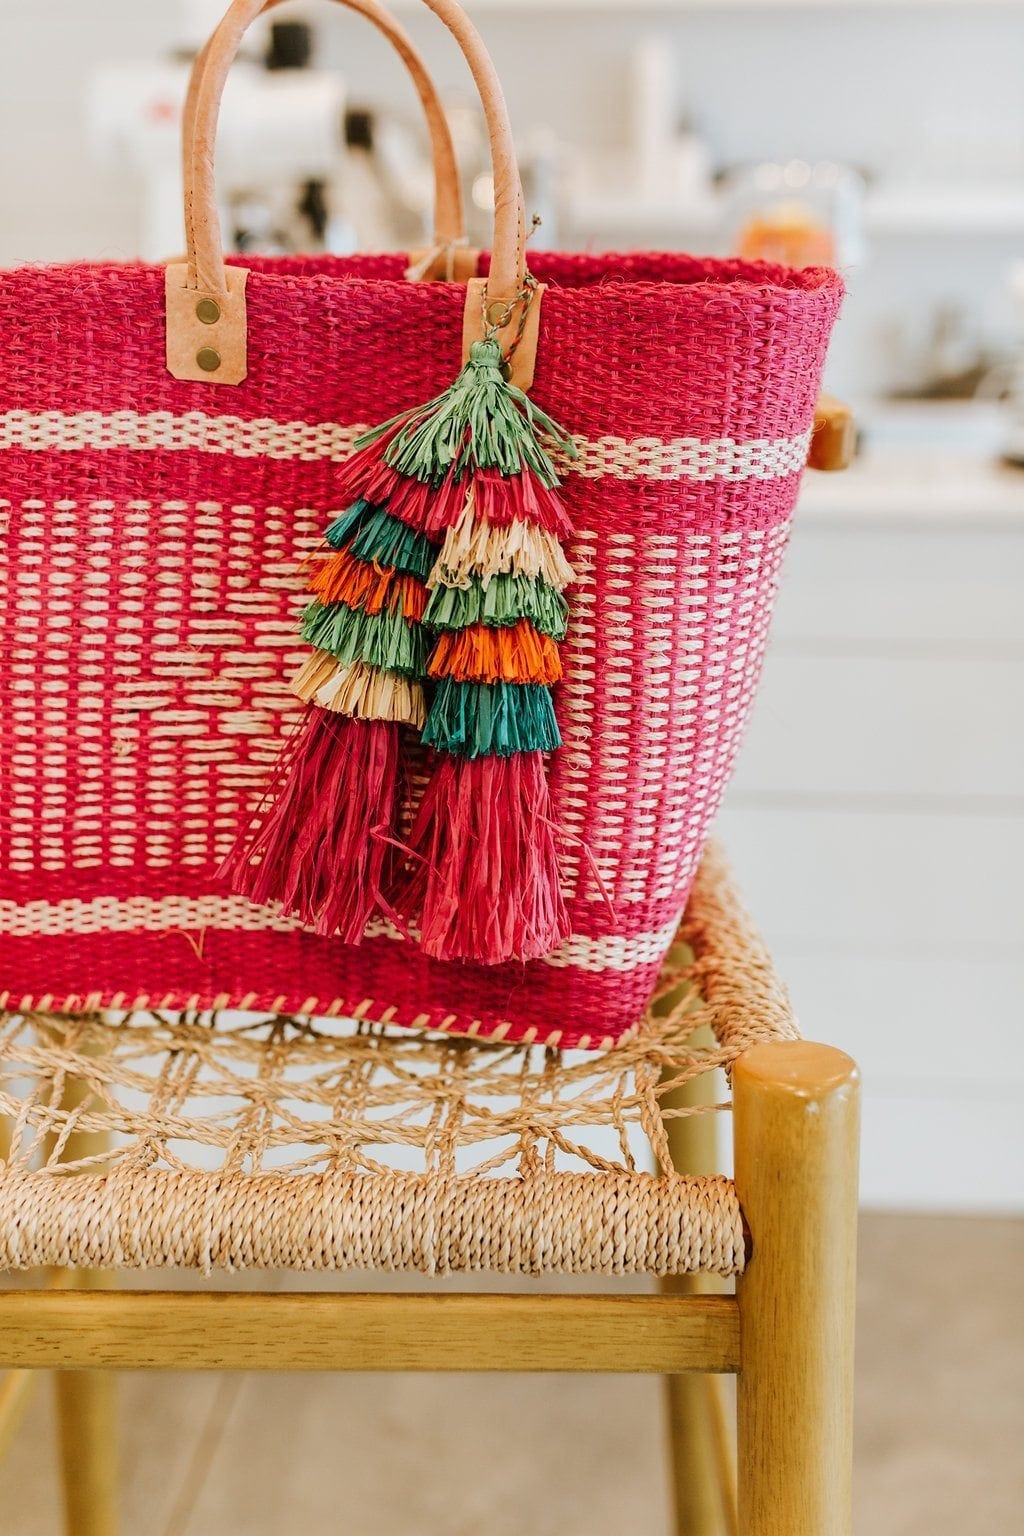 Pin on Summer straw bags